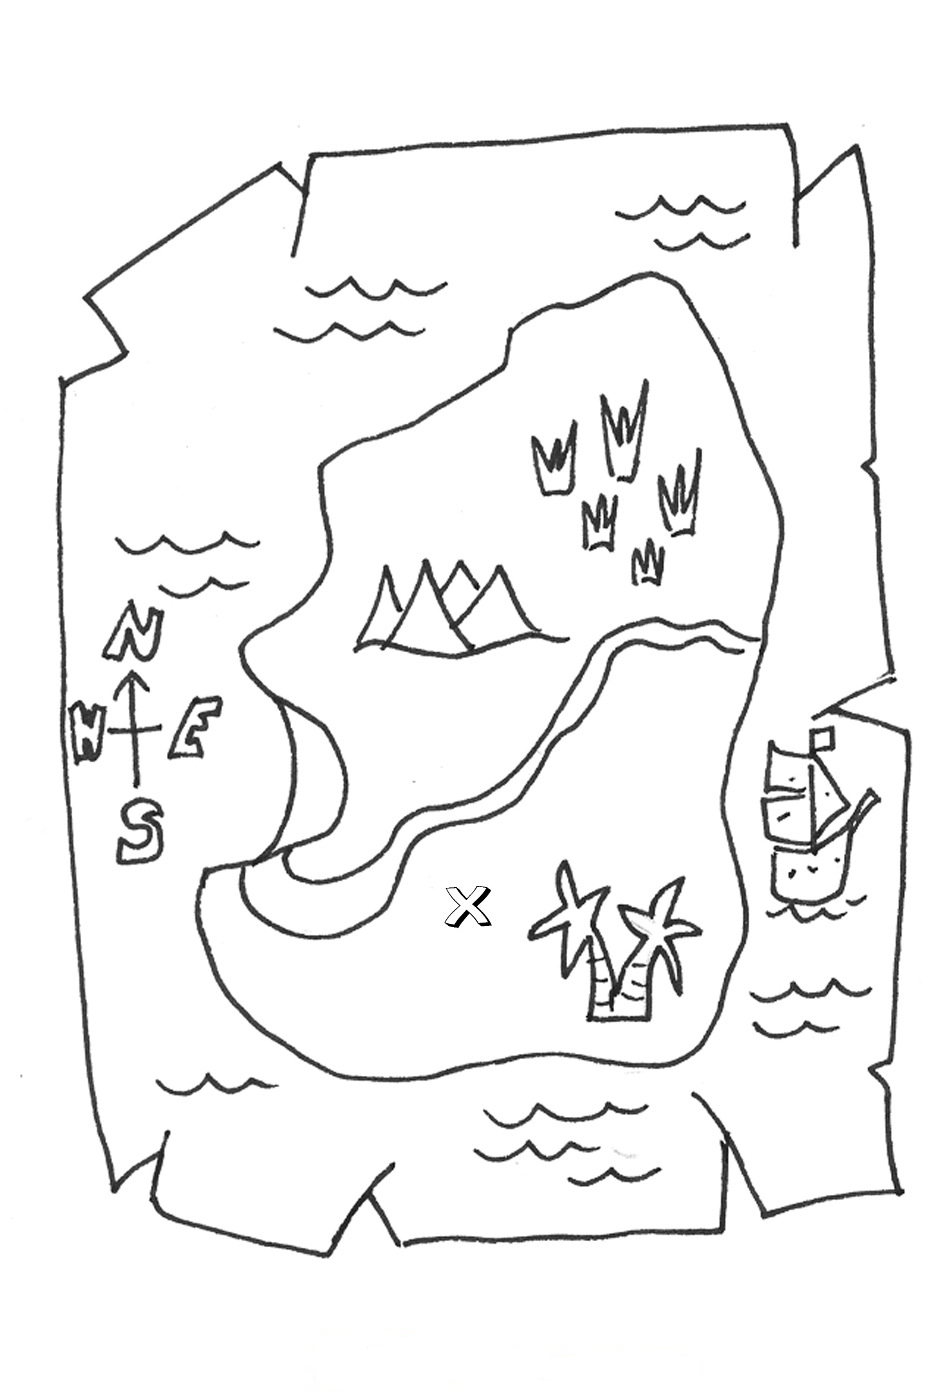 Treasure map coloring page coloring pages for kids coloring book pages treasure maps